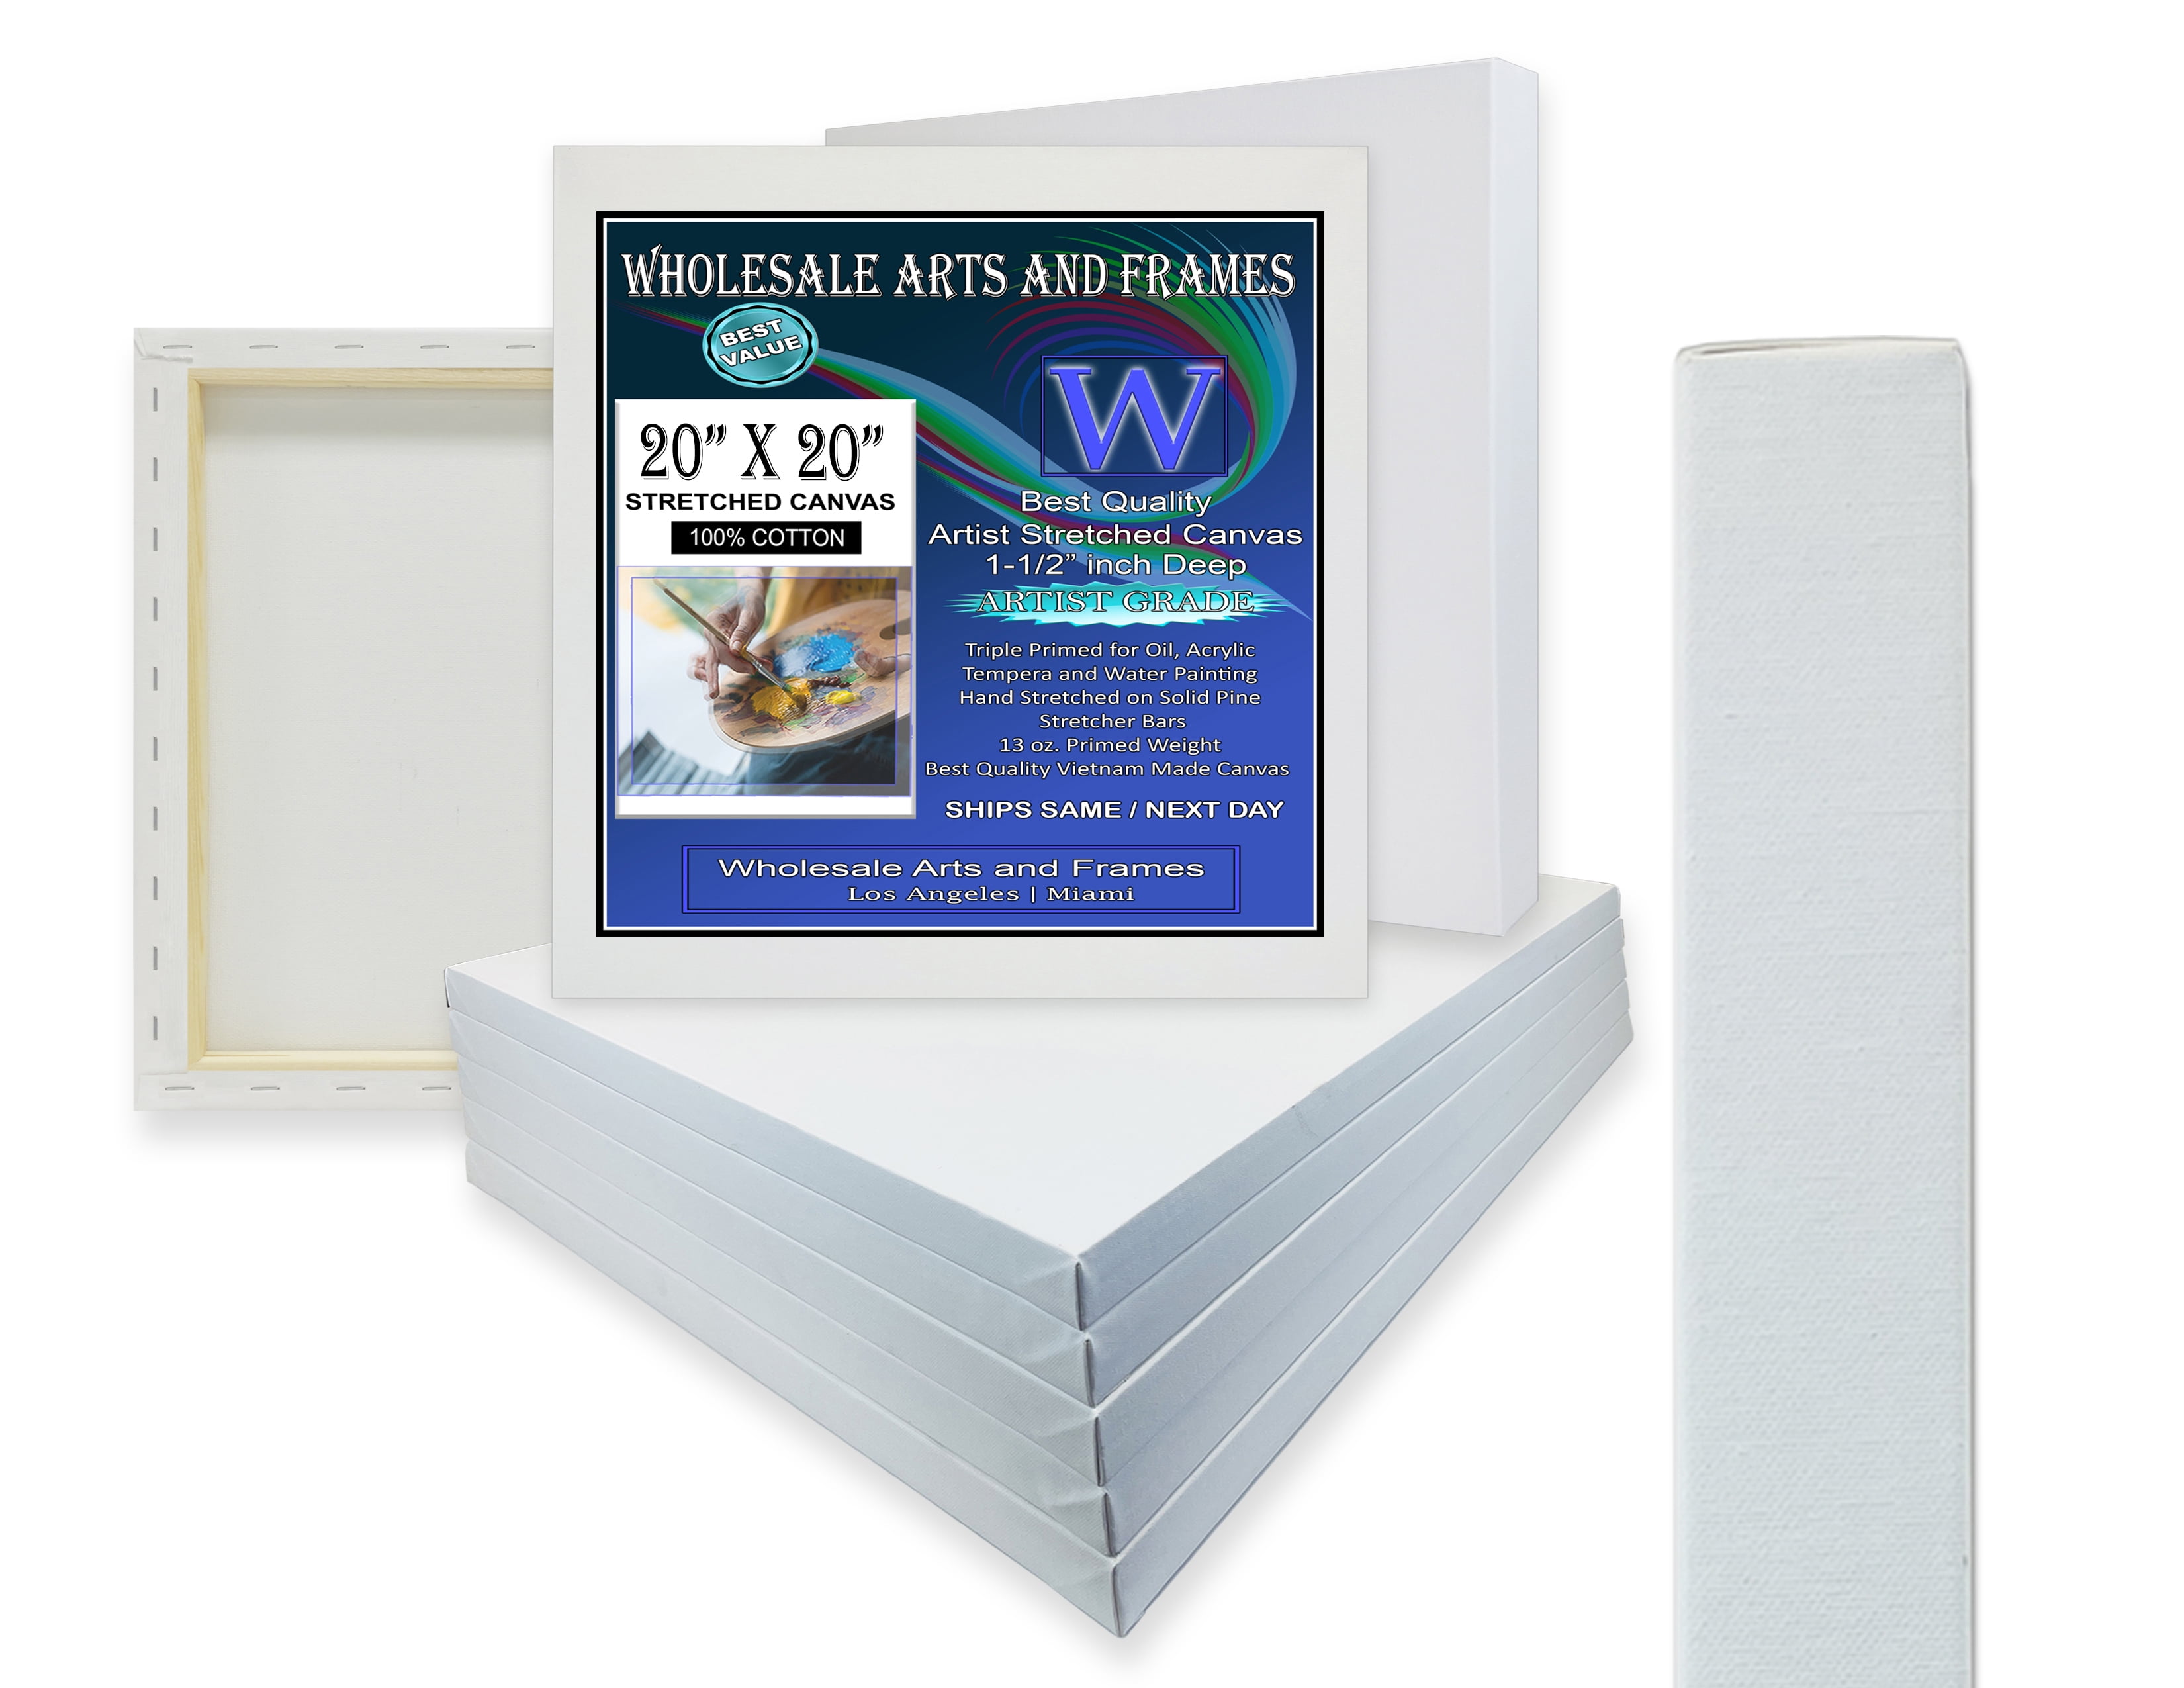 Daler-Rowney Simply Canvas Panels, White Art Canvas, 16 x 20, 3 Pk for  Artists & Students